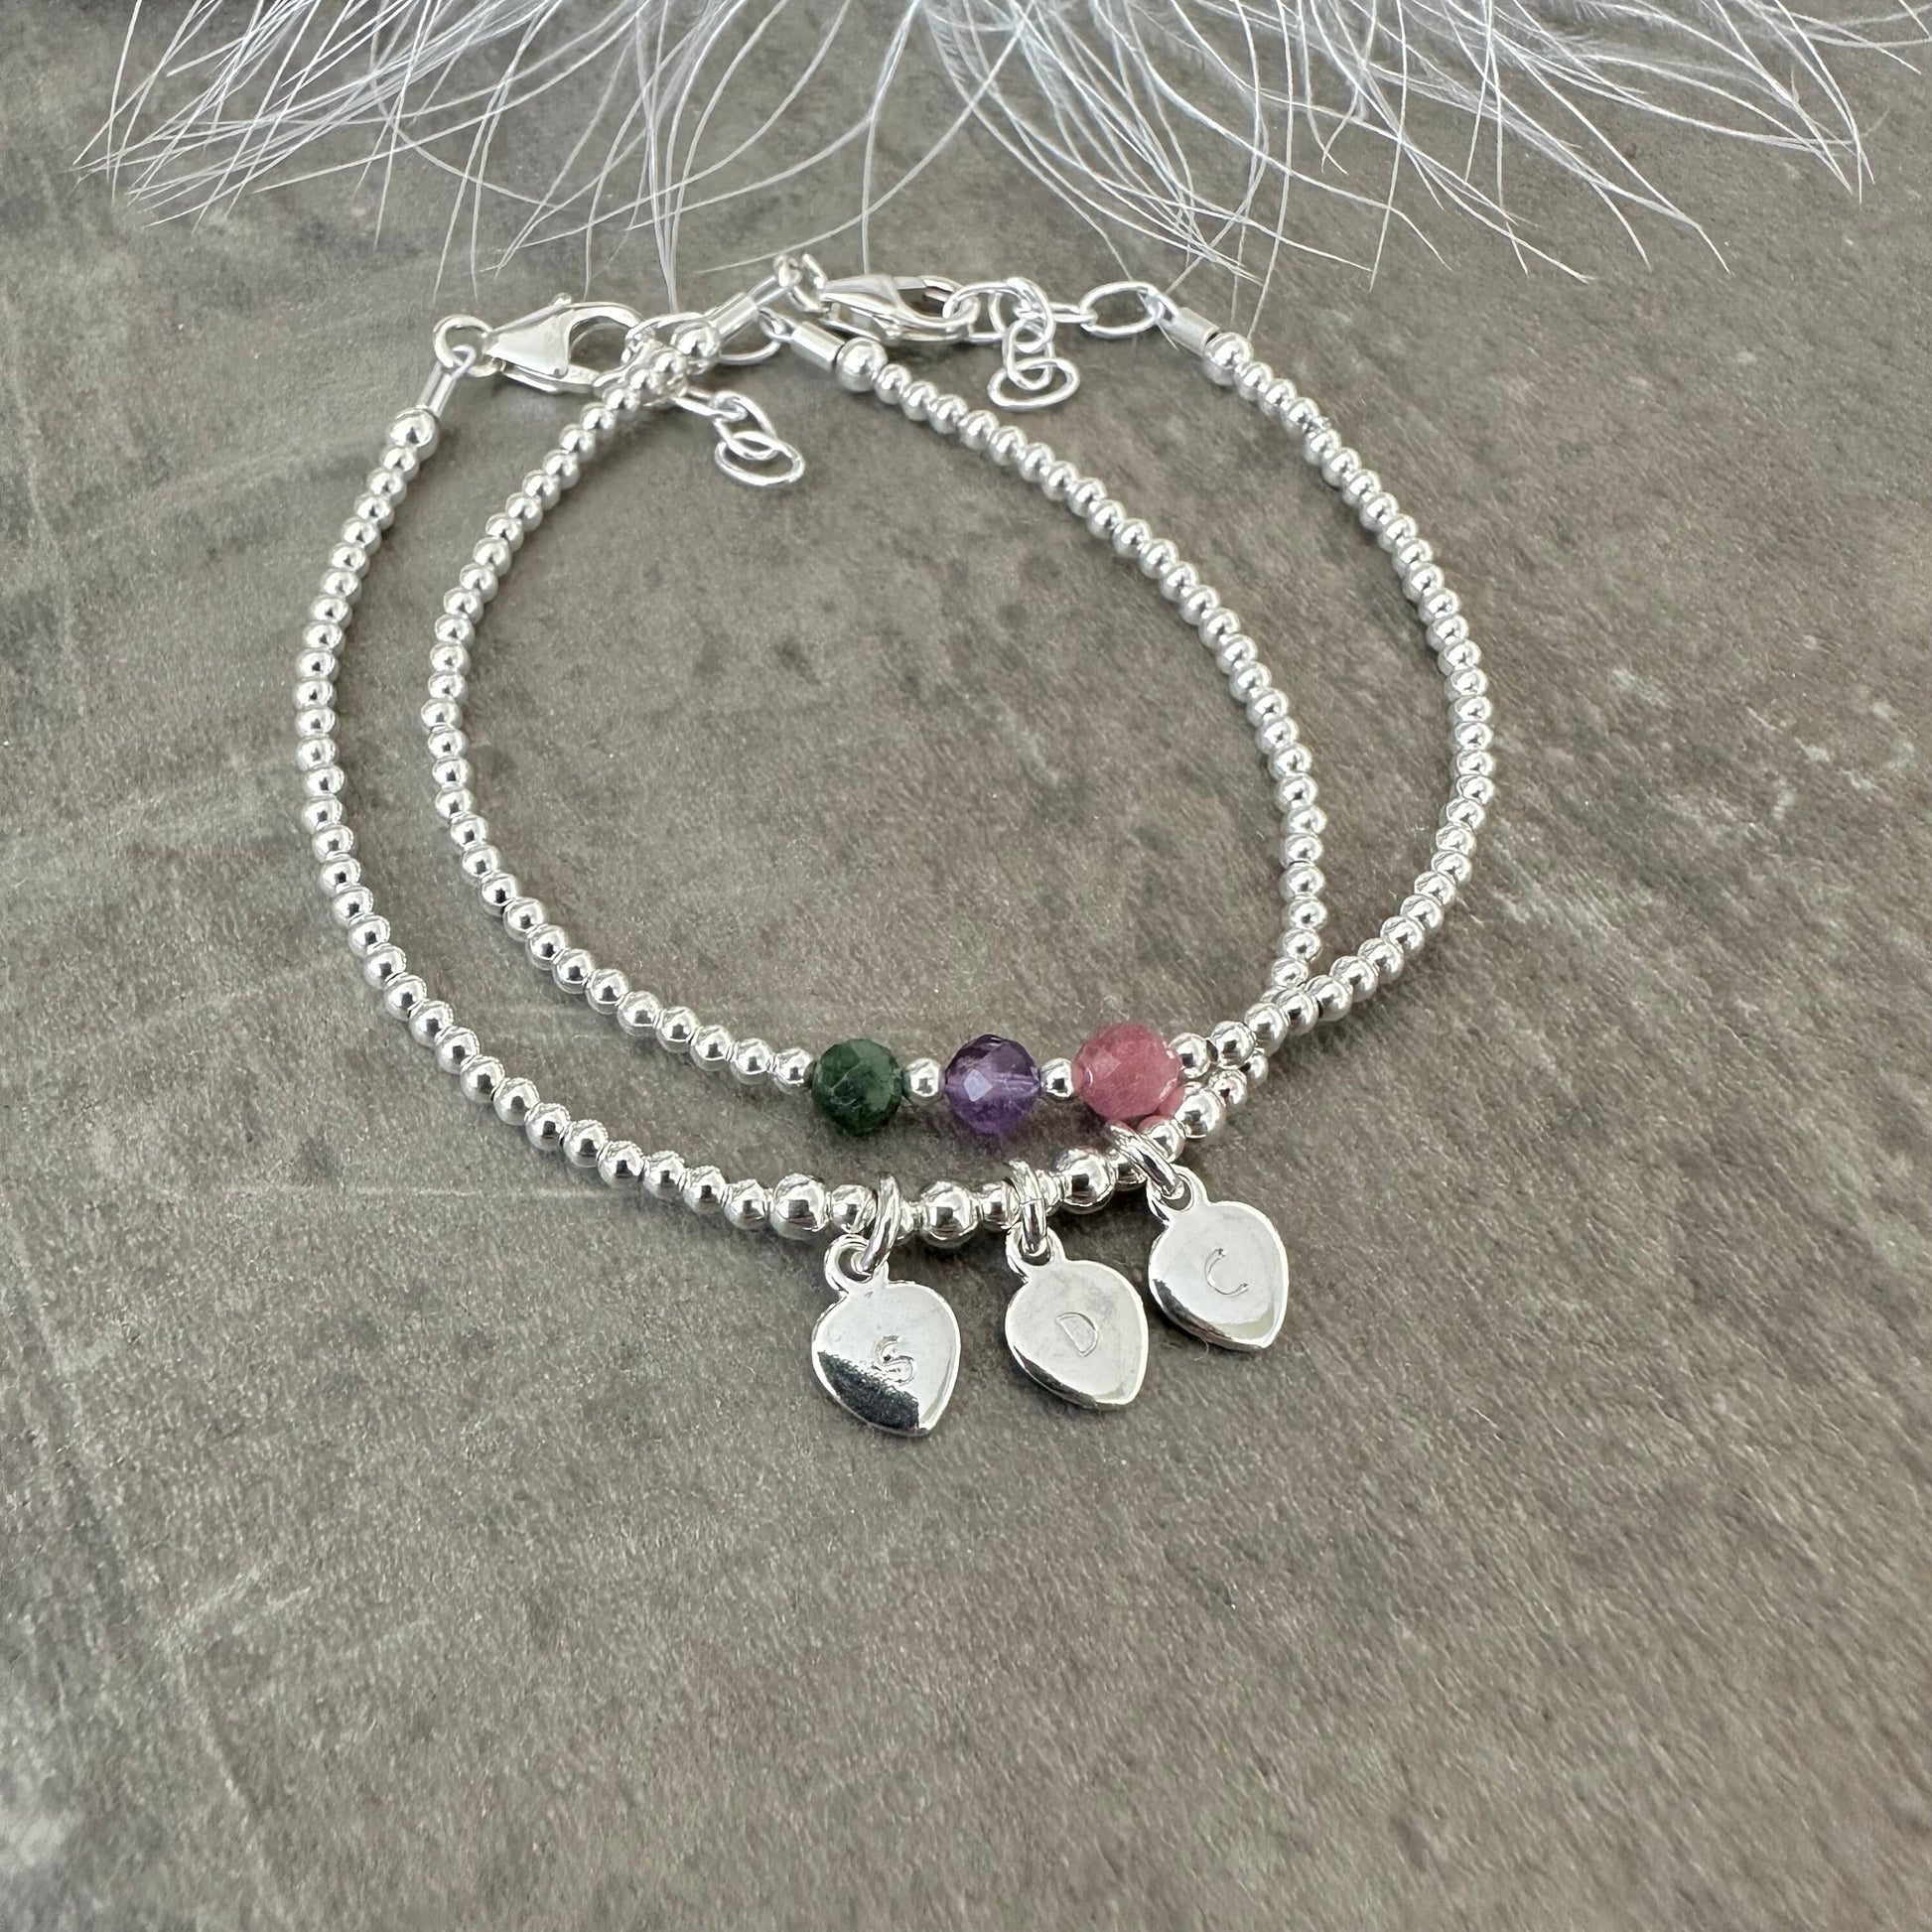 Two Bracelet Set for Mums Personalised Family Birthstones & Initials, Dainty Sterling Silver Family Jewellery for Mothering Sunday Gift